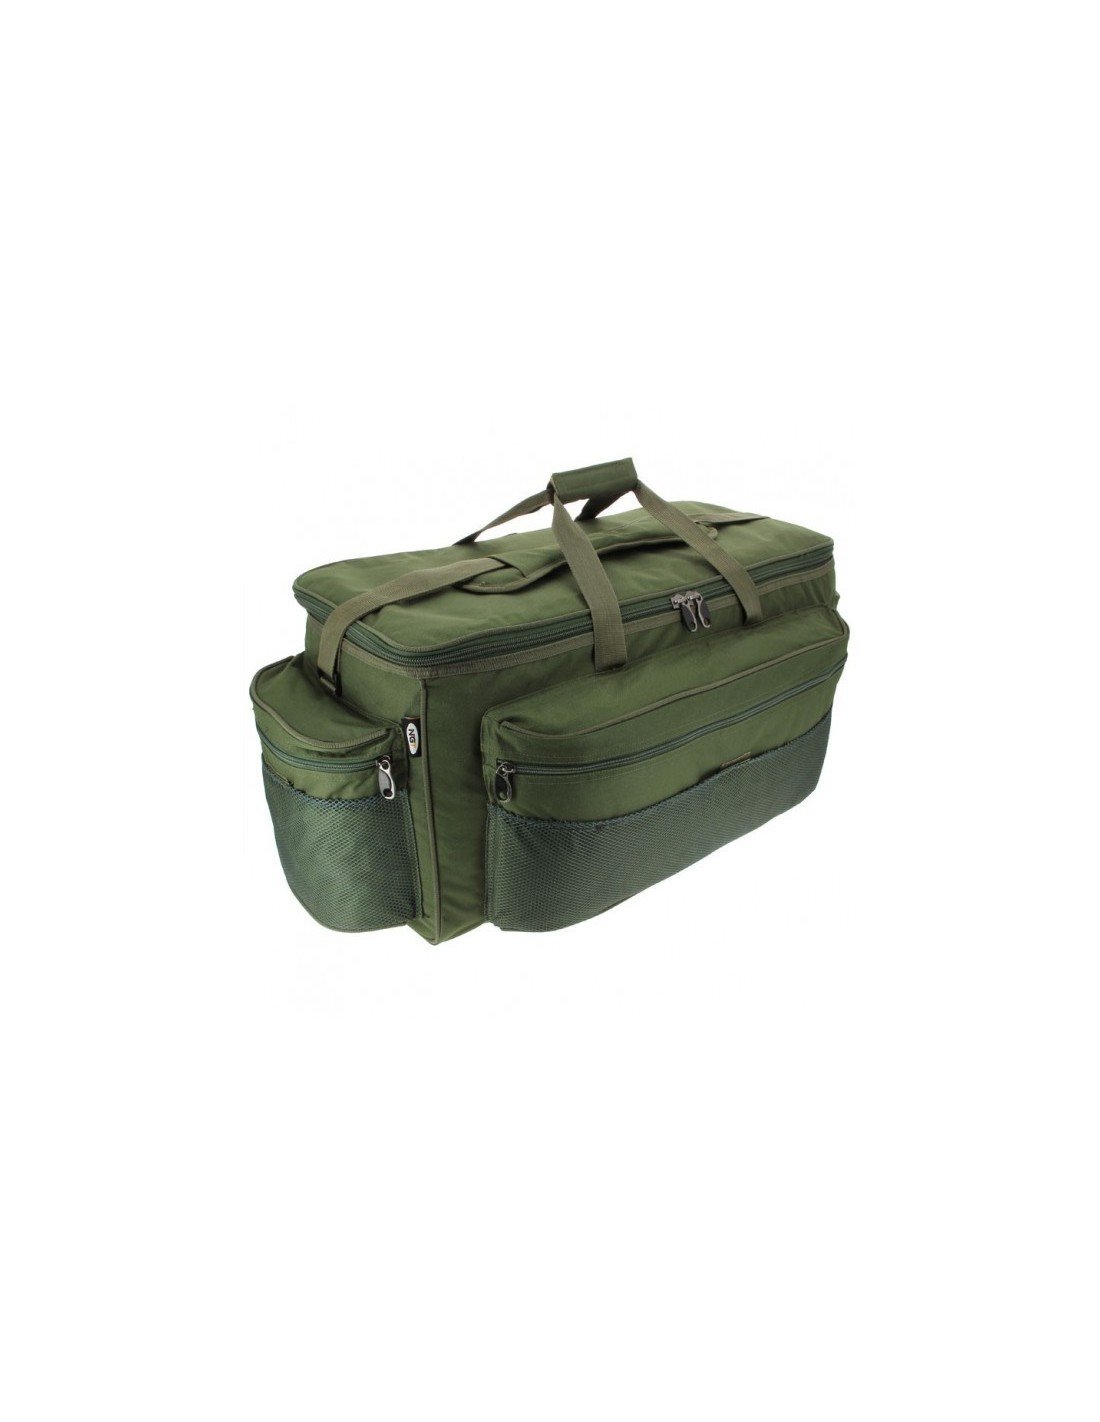 NGT Giant Green Carryall (093-L) сак